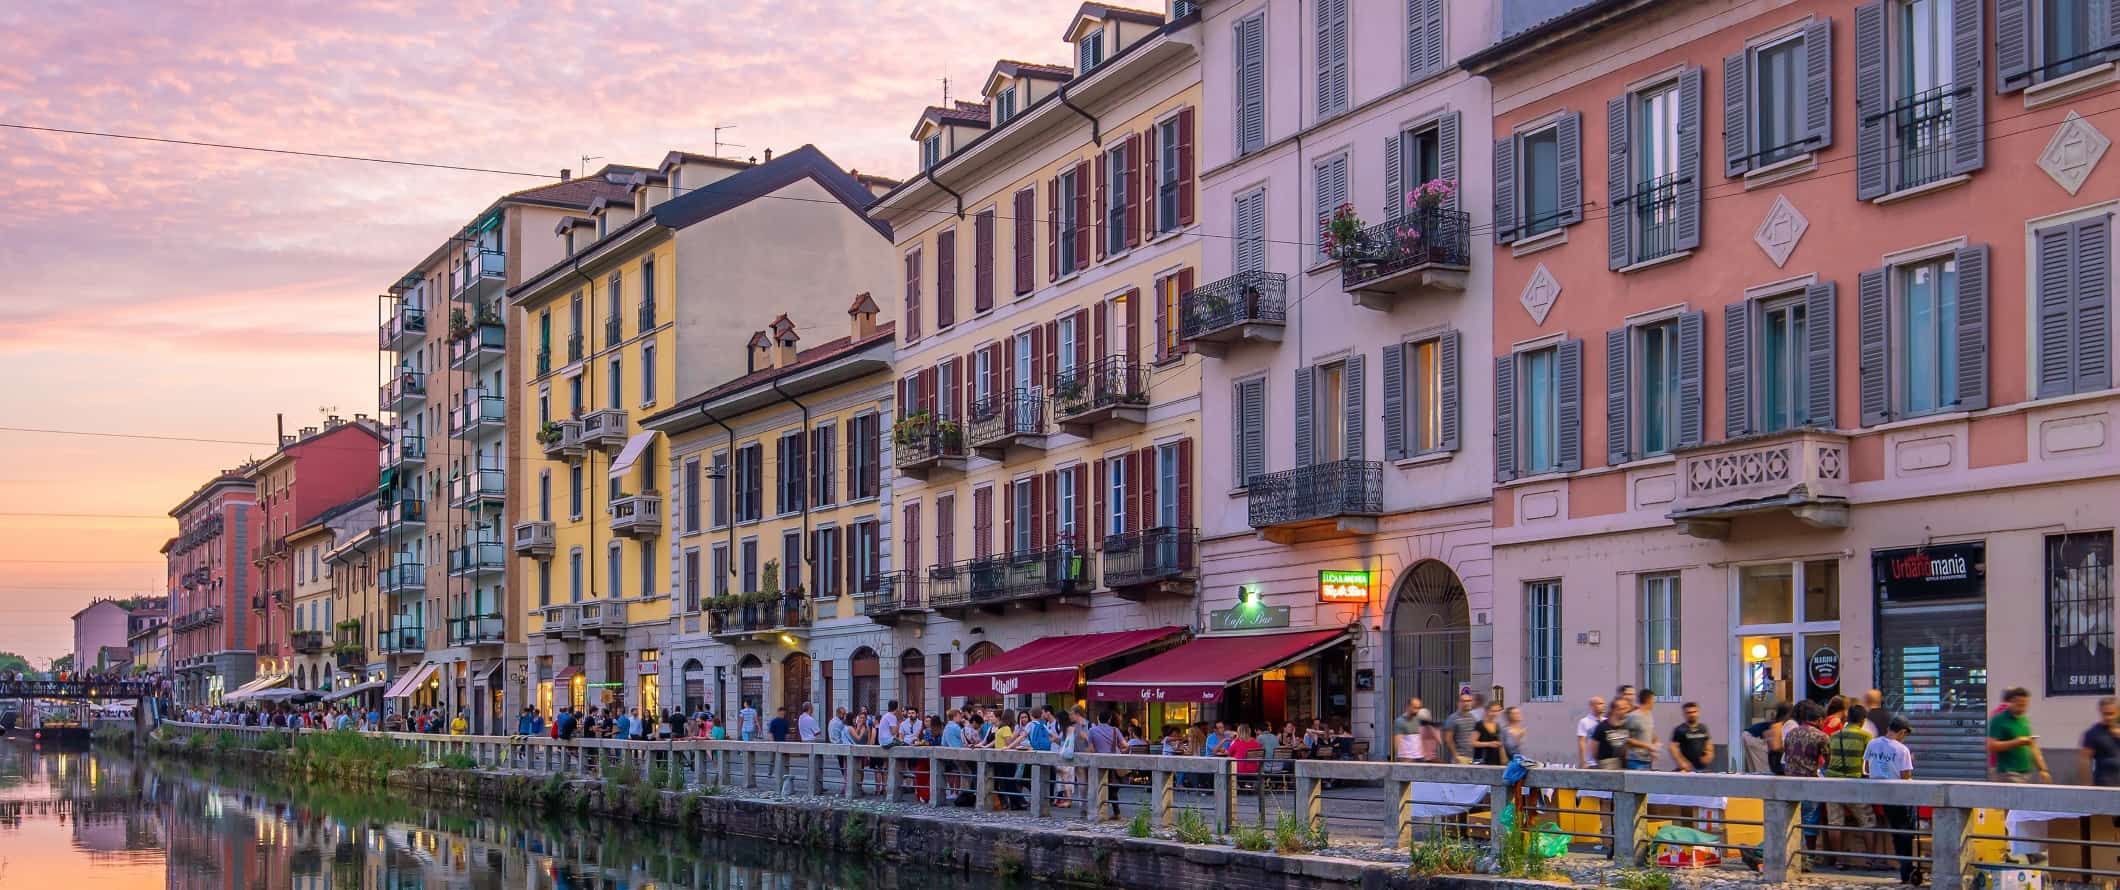 Colorful buildings along a canal at sunset in the Naviglio Grande district in Milan, Italy.